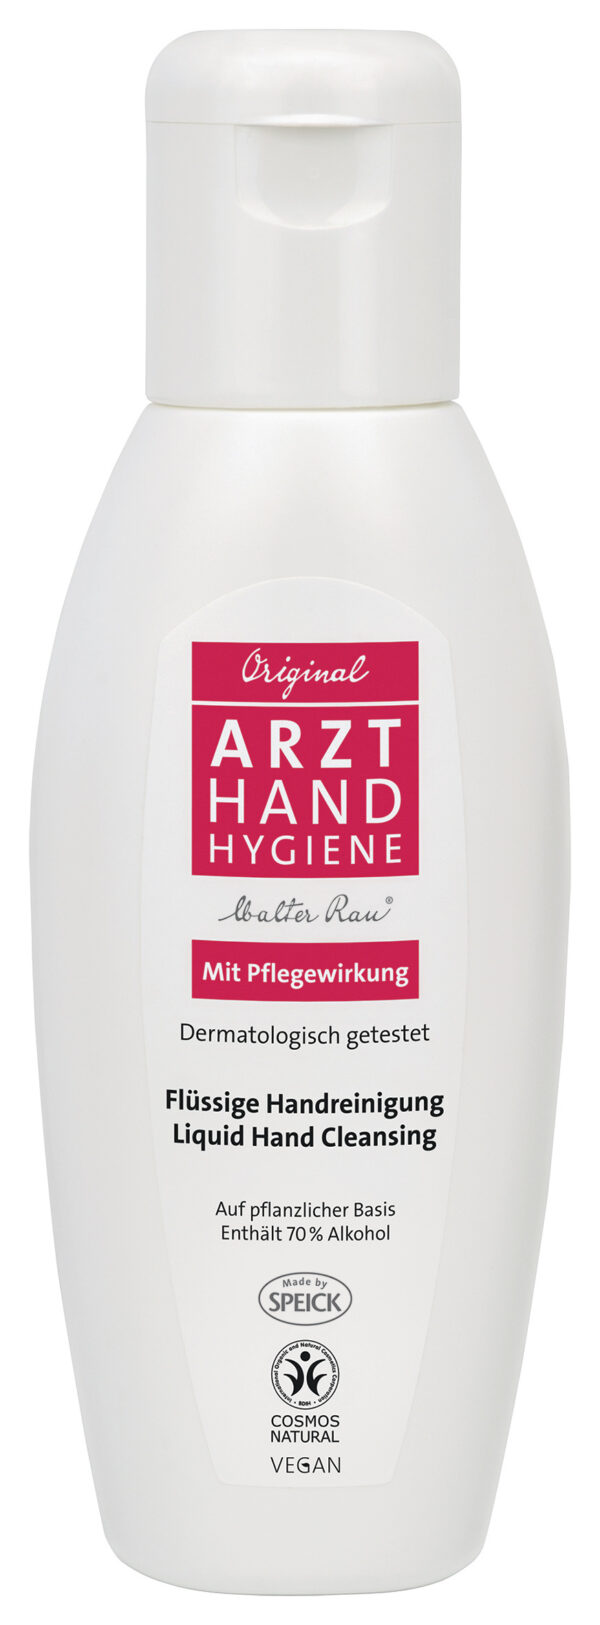 Made by Speick Arzt Handhygiene 100ml ***